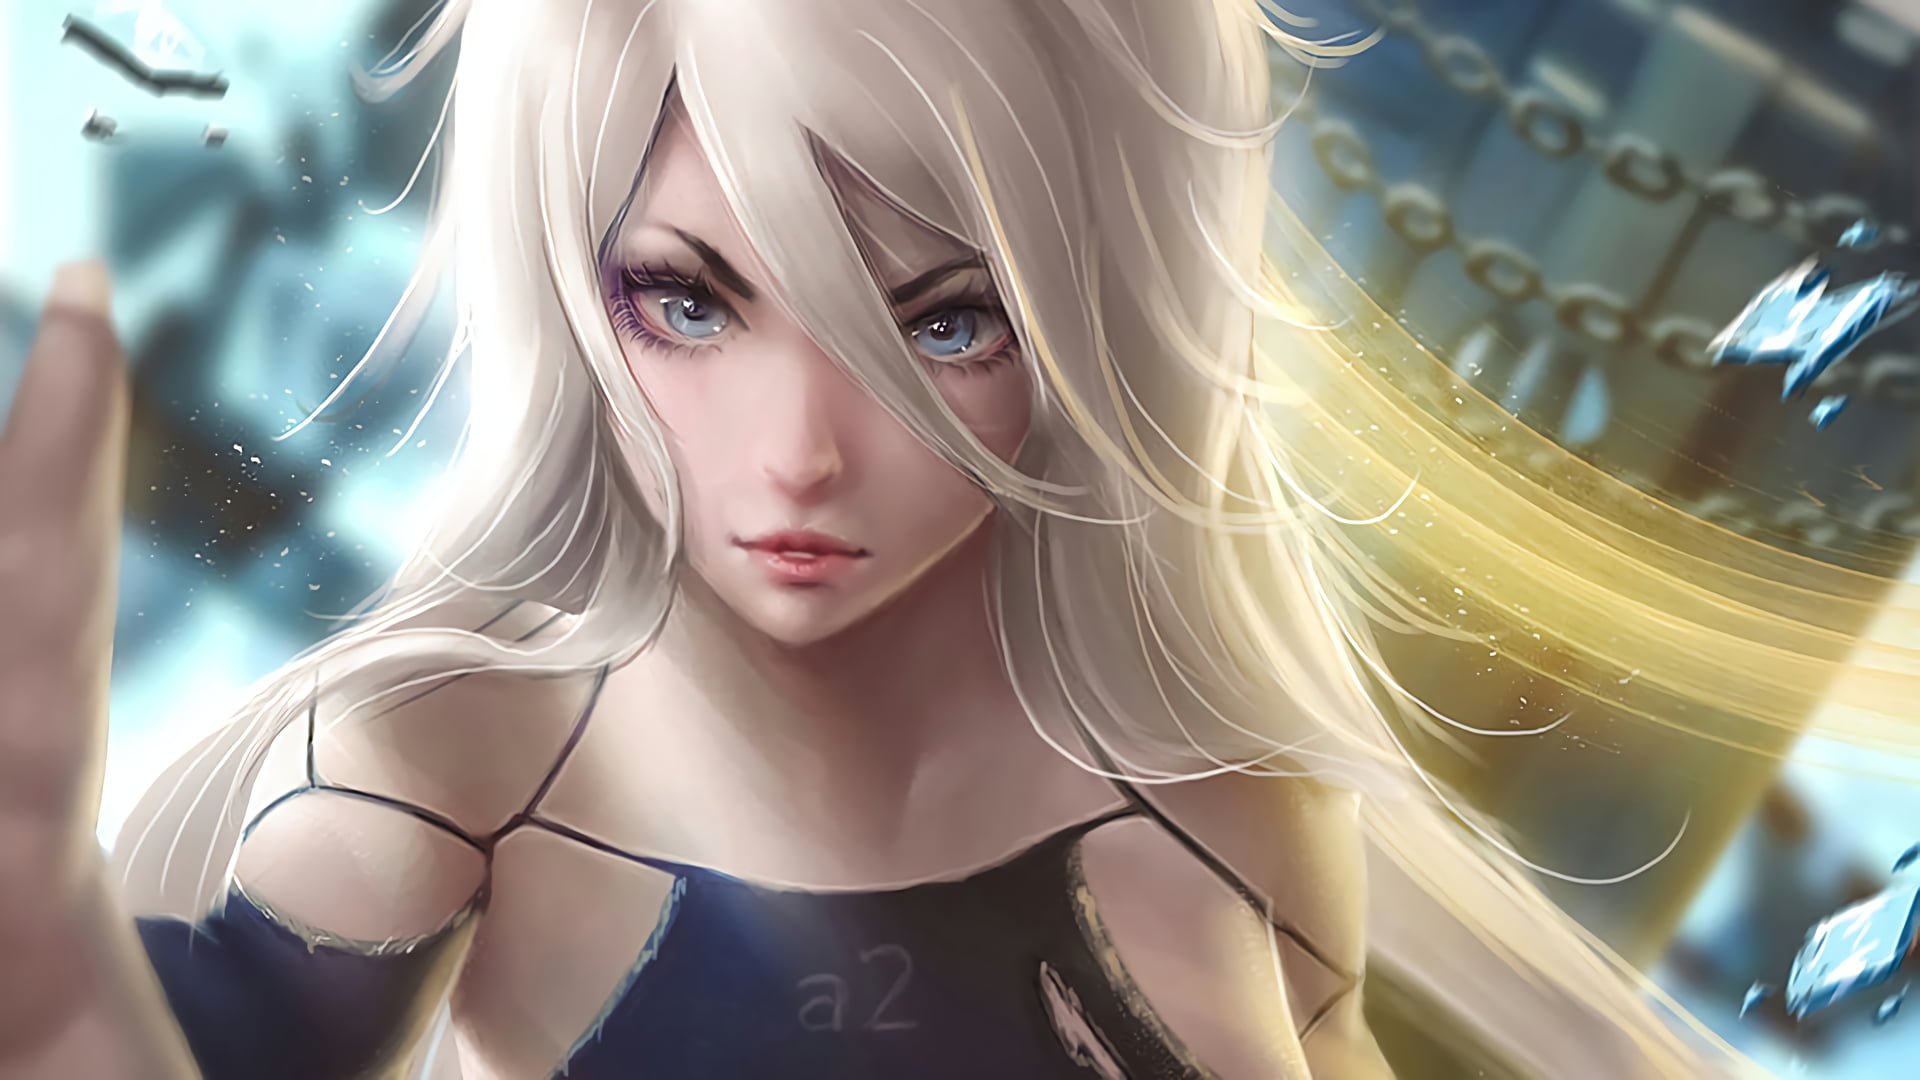 white haired female anime character wallpaper, A2 (Nier: Automata)